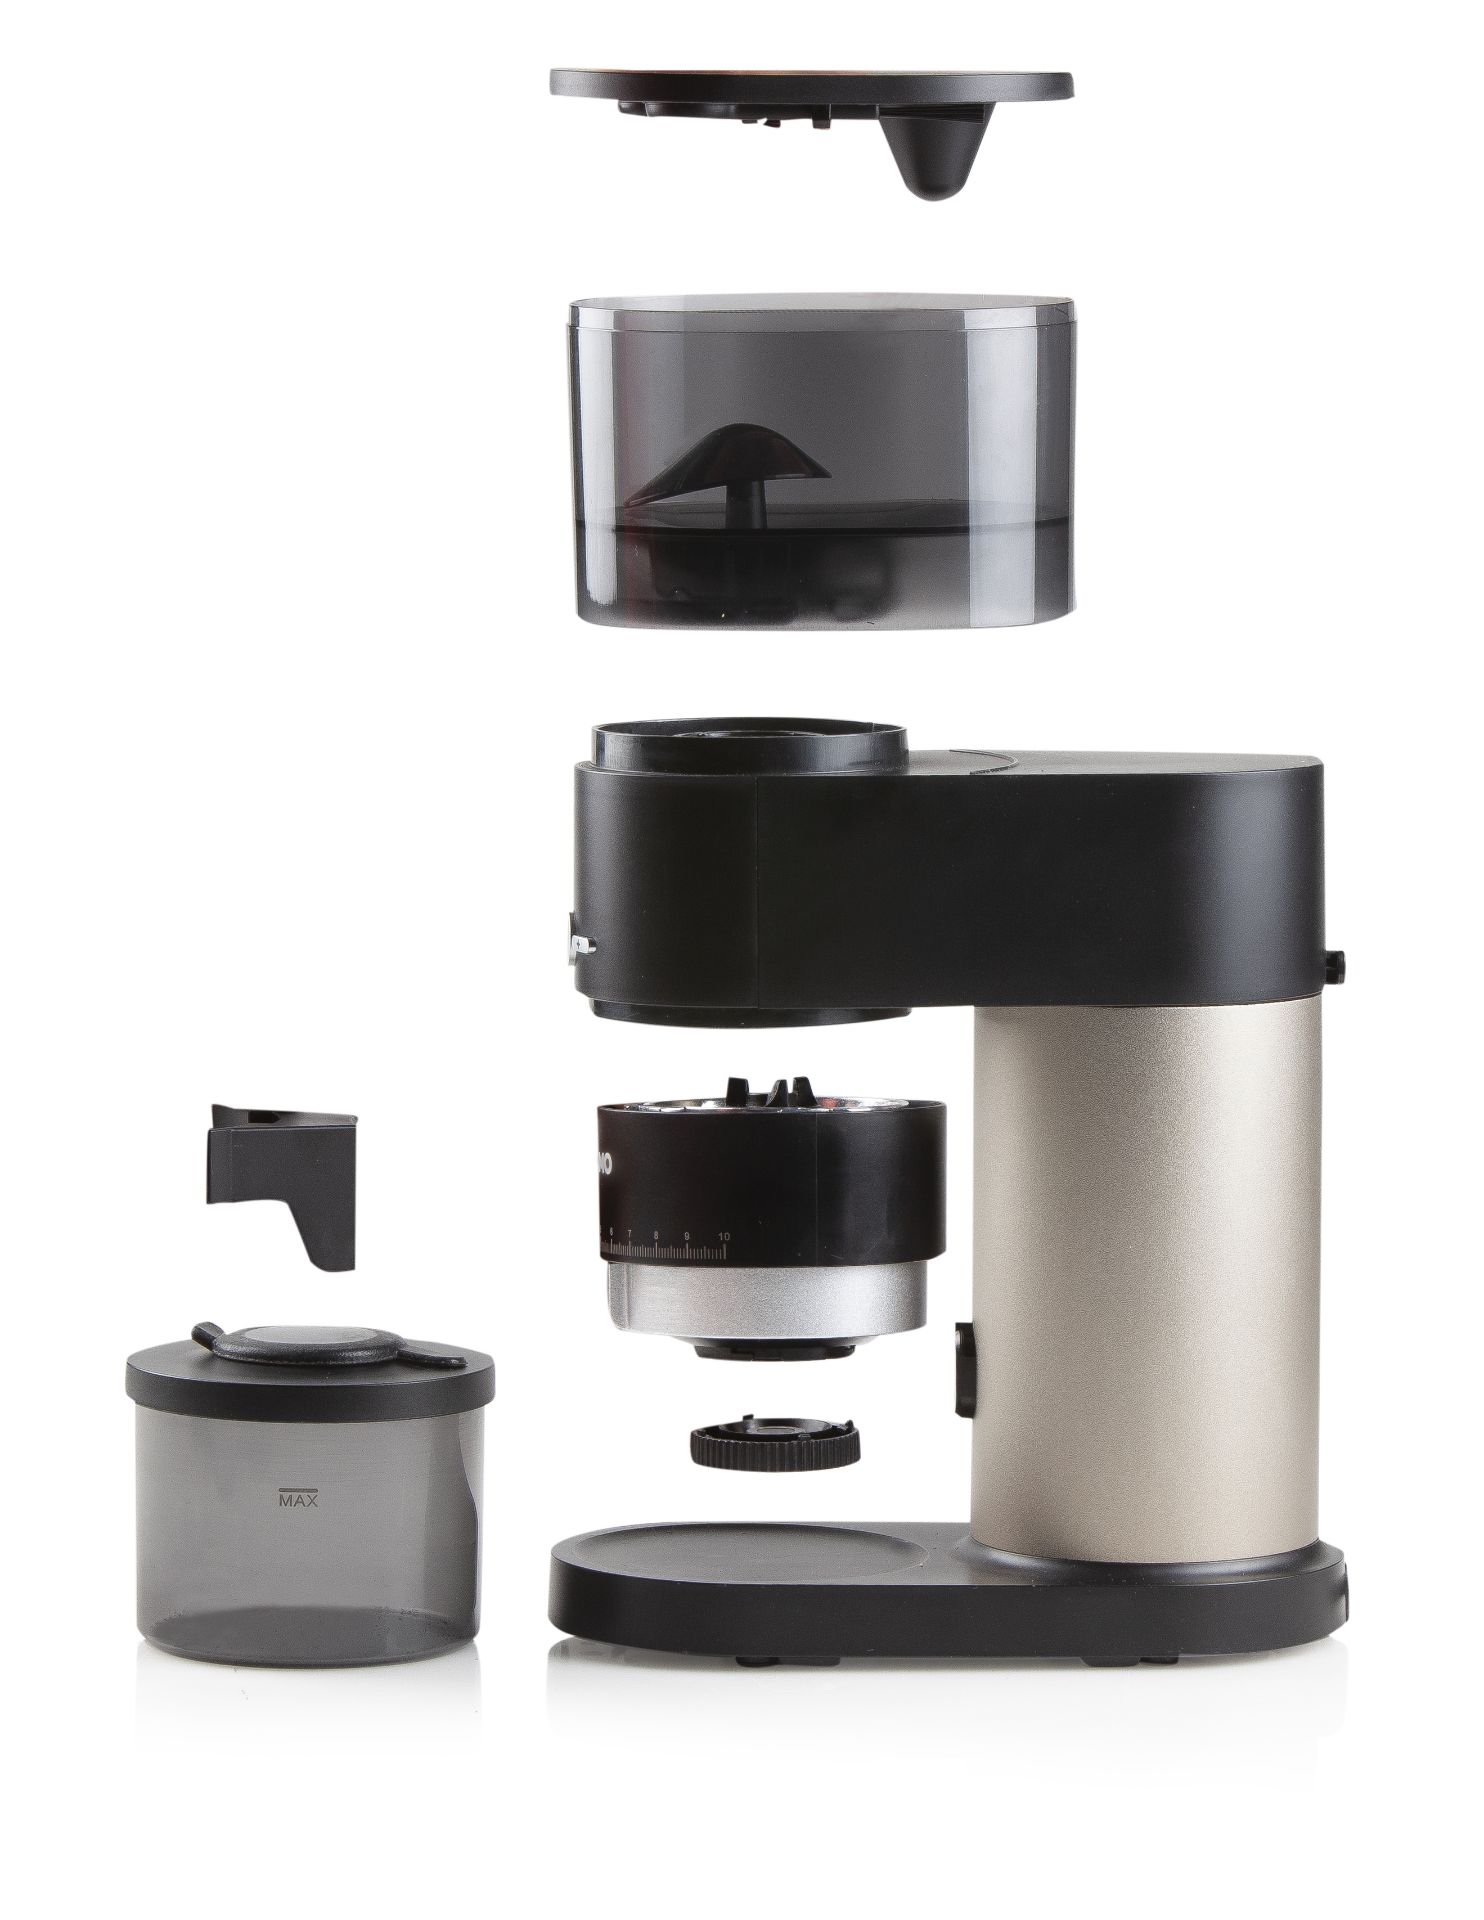 4 x DOMO Barista Style Coffee Grinder Black SS 120g Urban RRP £ 150 total £ 600 - Image 3 of 11